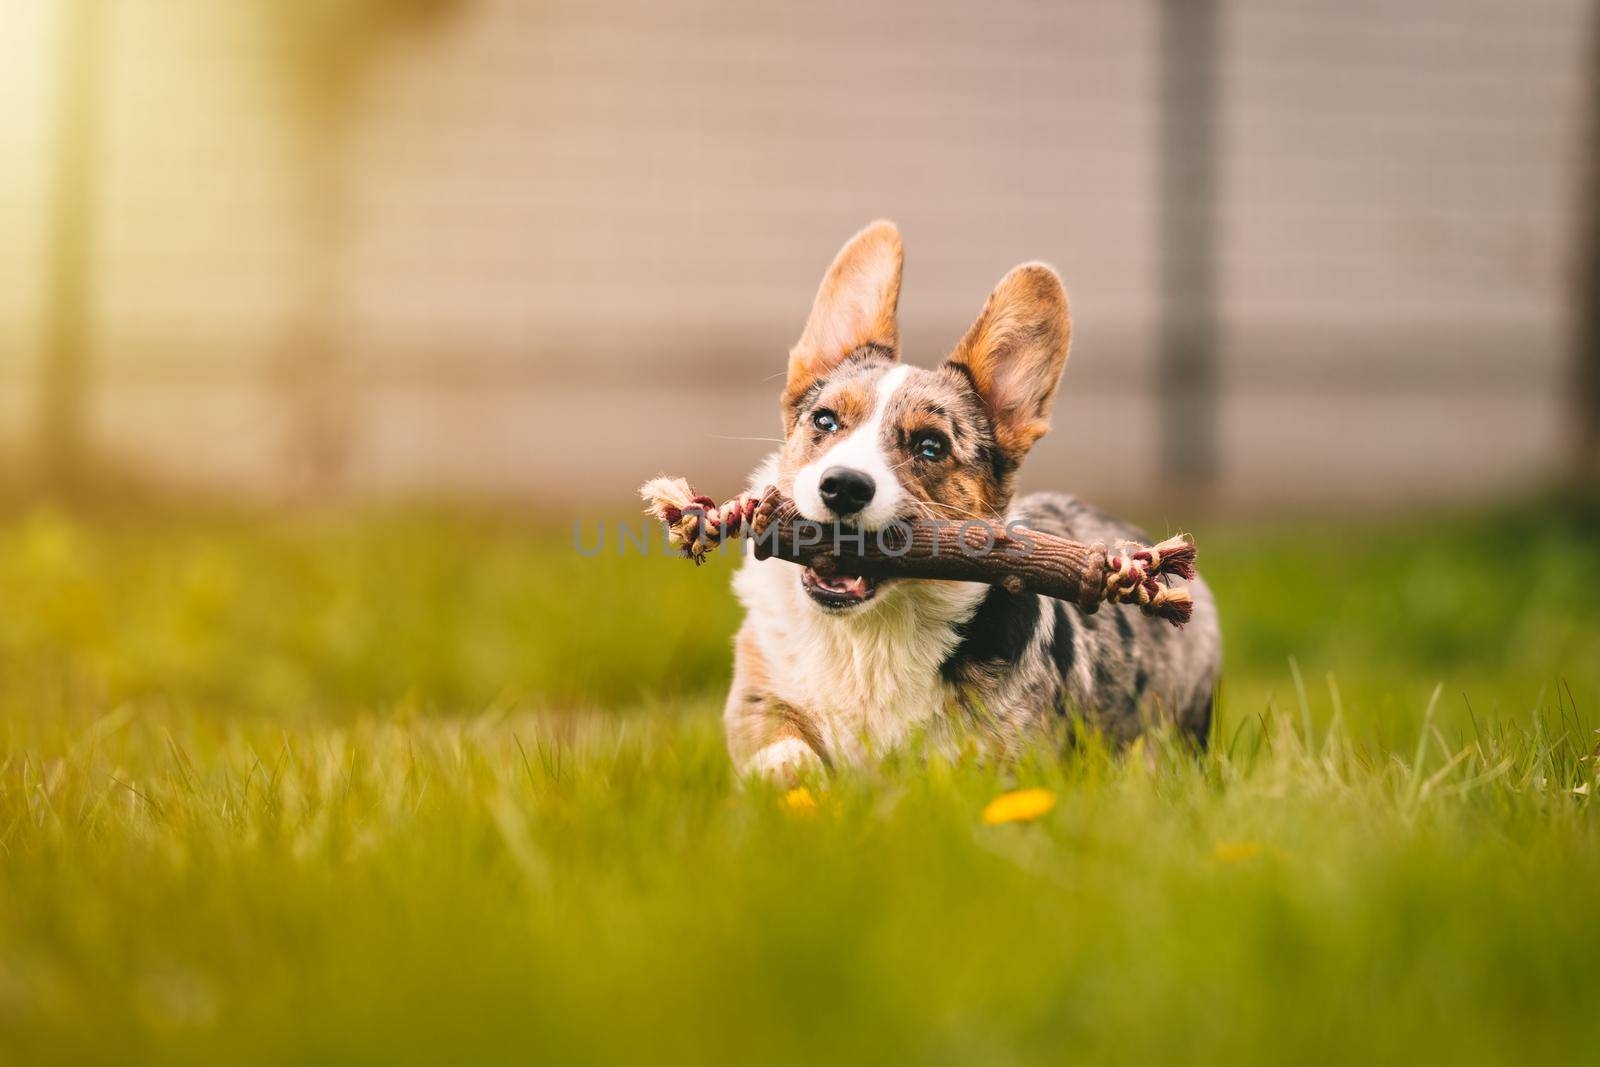 Happy corgi dog running in the grass with stick toy for dogs outdoors on a sunny day. Funny corgi puppy playing with dog toy by DariaKulkova